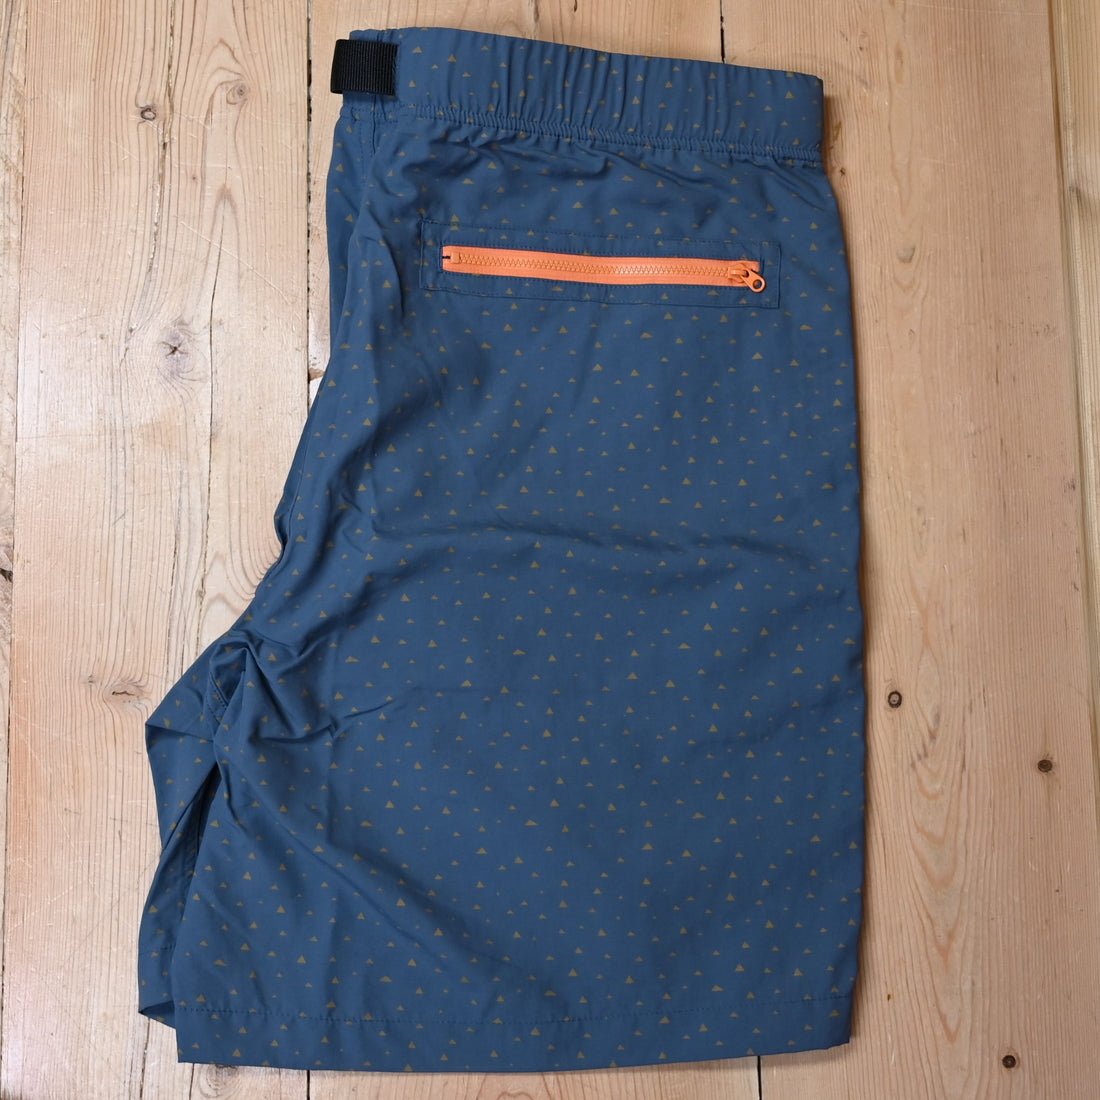 Pedernales Packable Shorts- Cheops: Petrol view of back